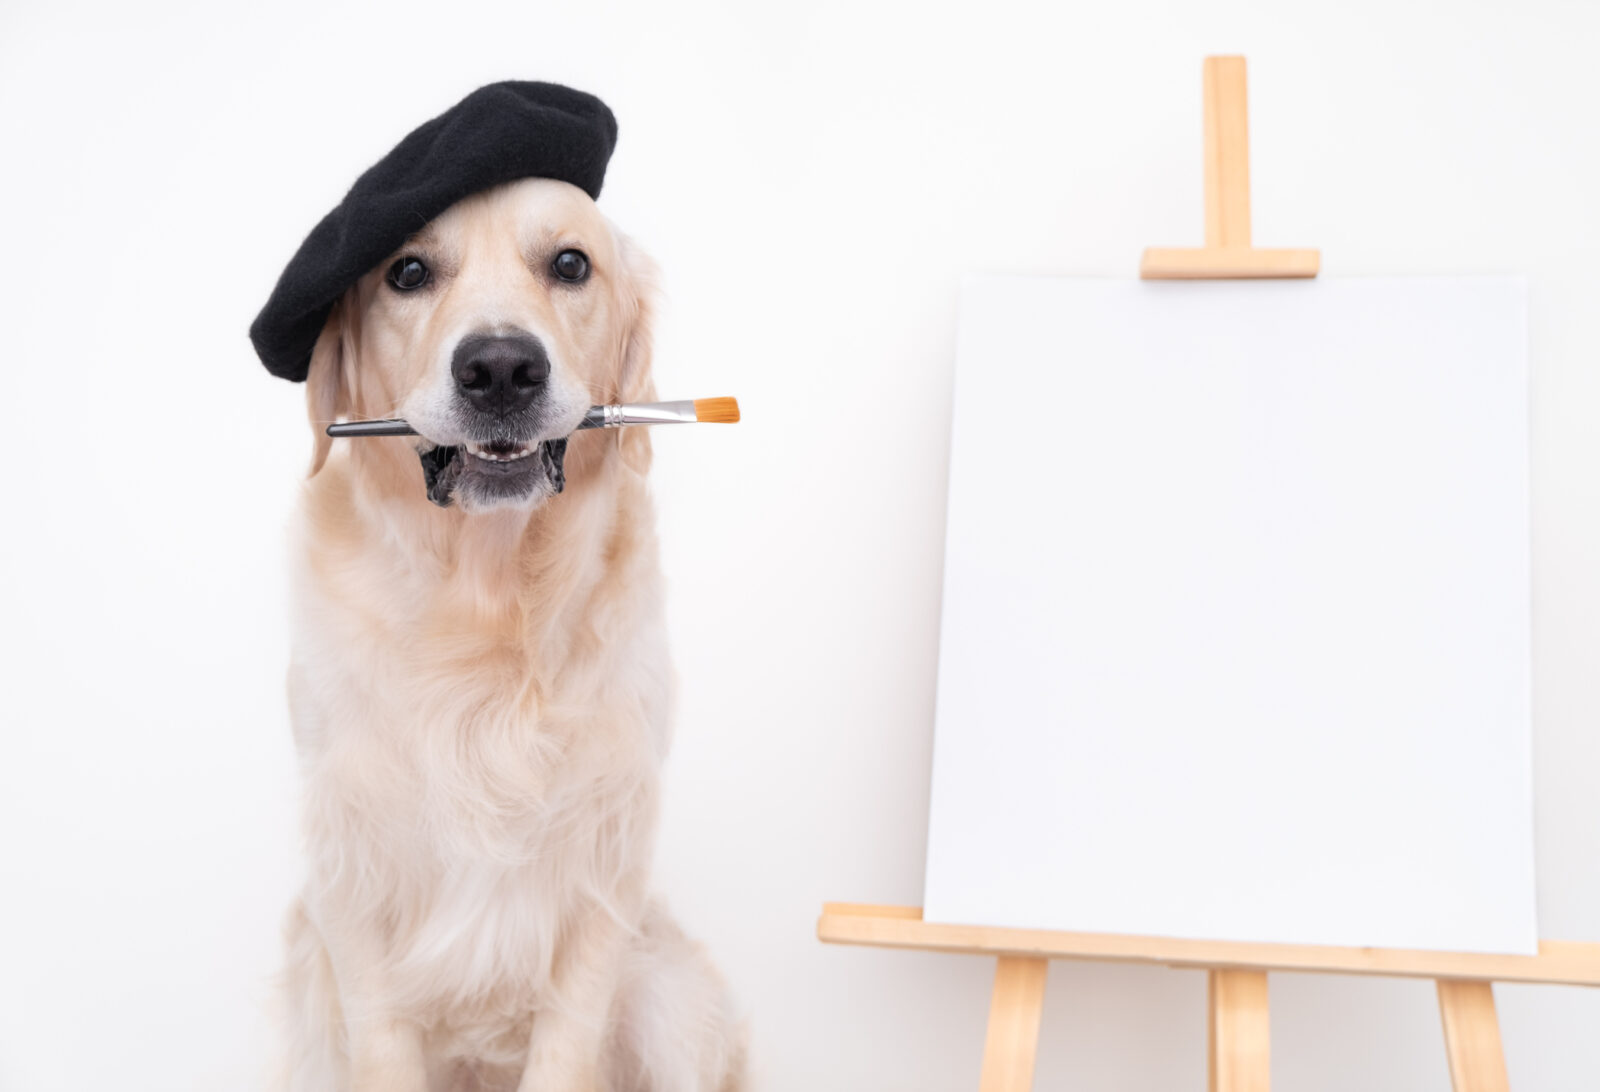 Dog Artist. A Golden Retriever Sits In A Beret Near An Easel With A White Blank And Holds A Brush In Its Teeth. Place For Text Or Picture